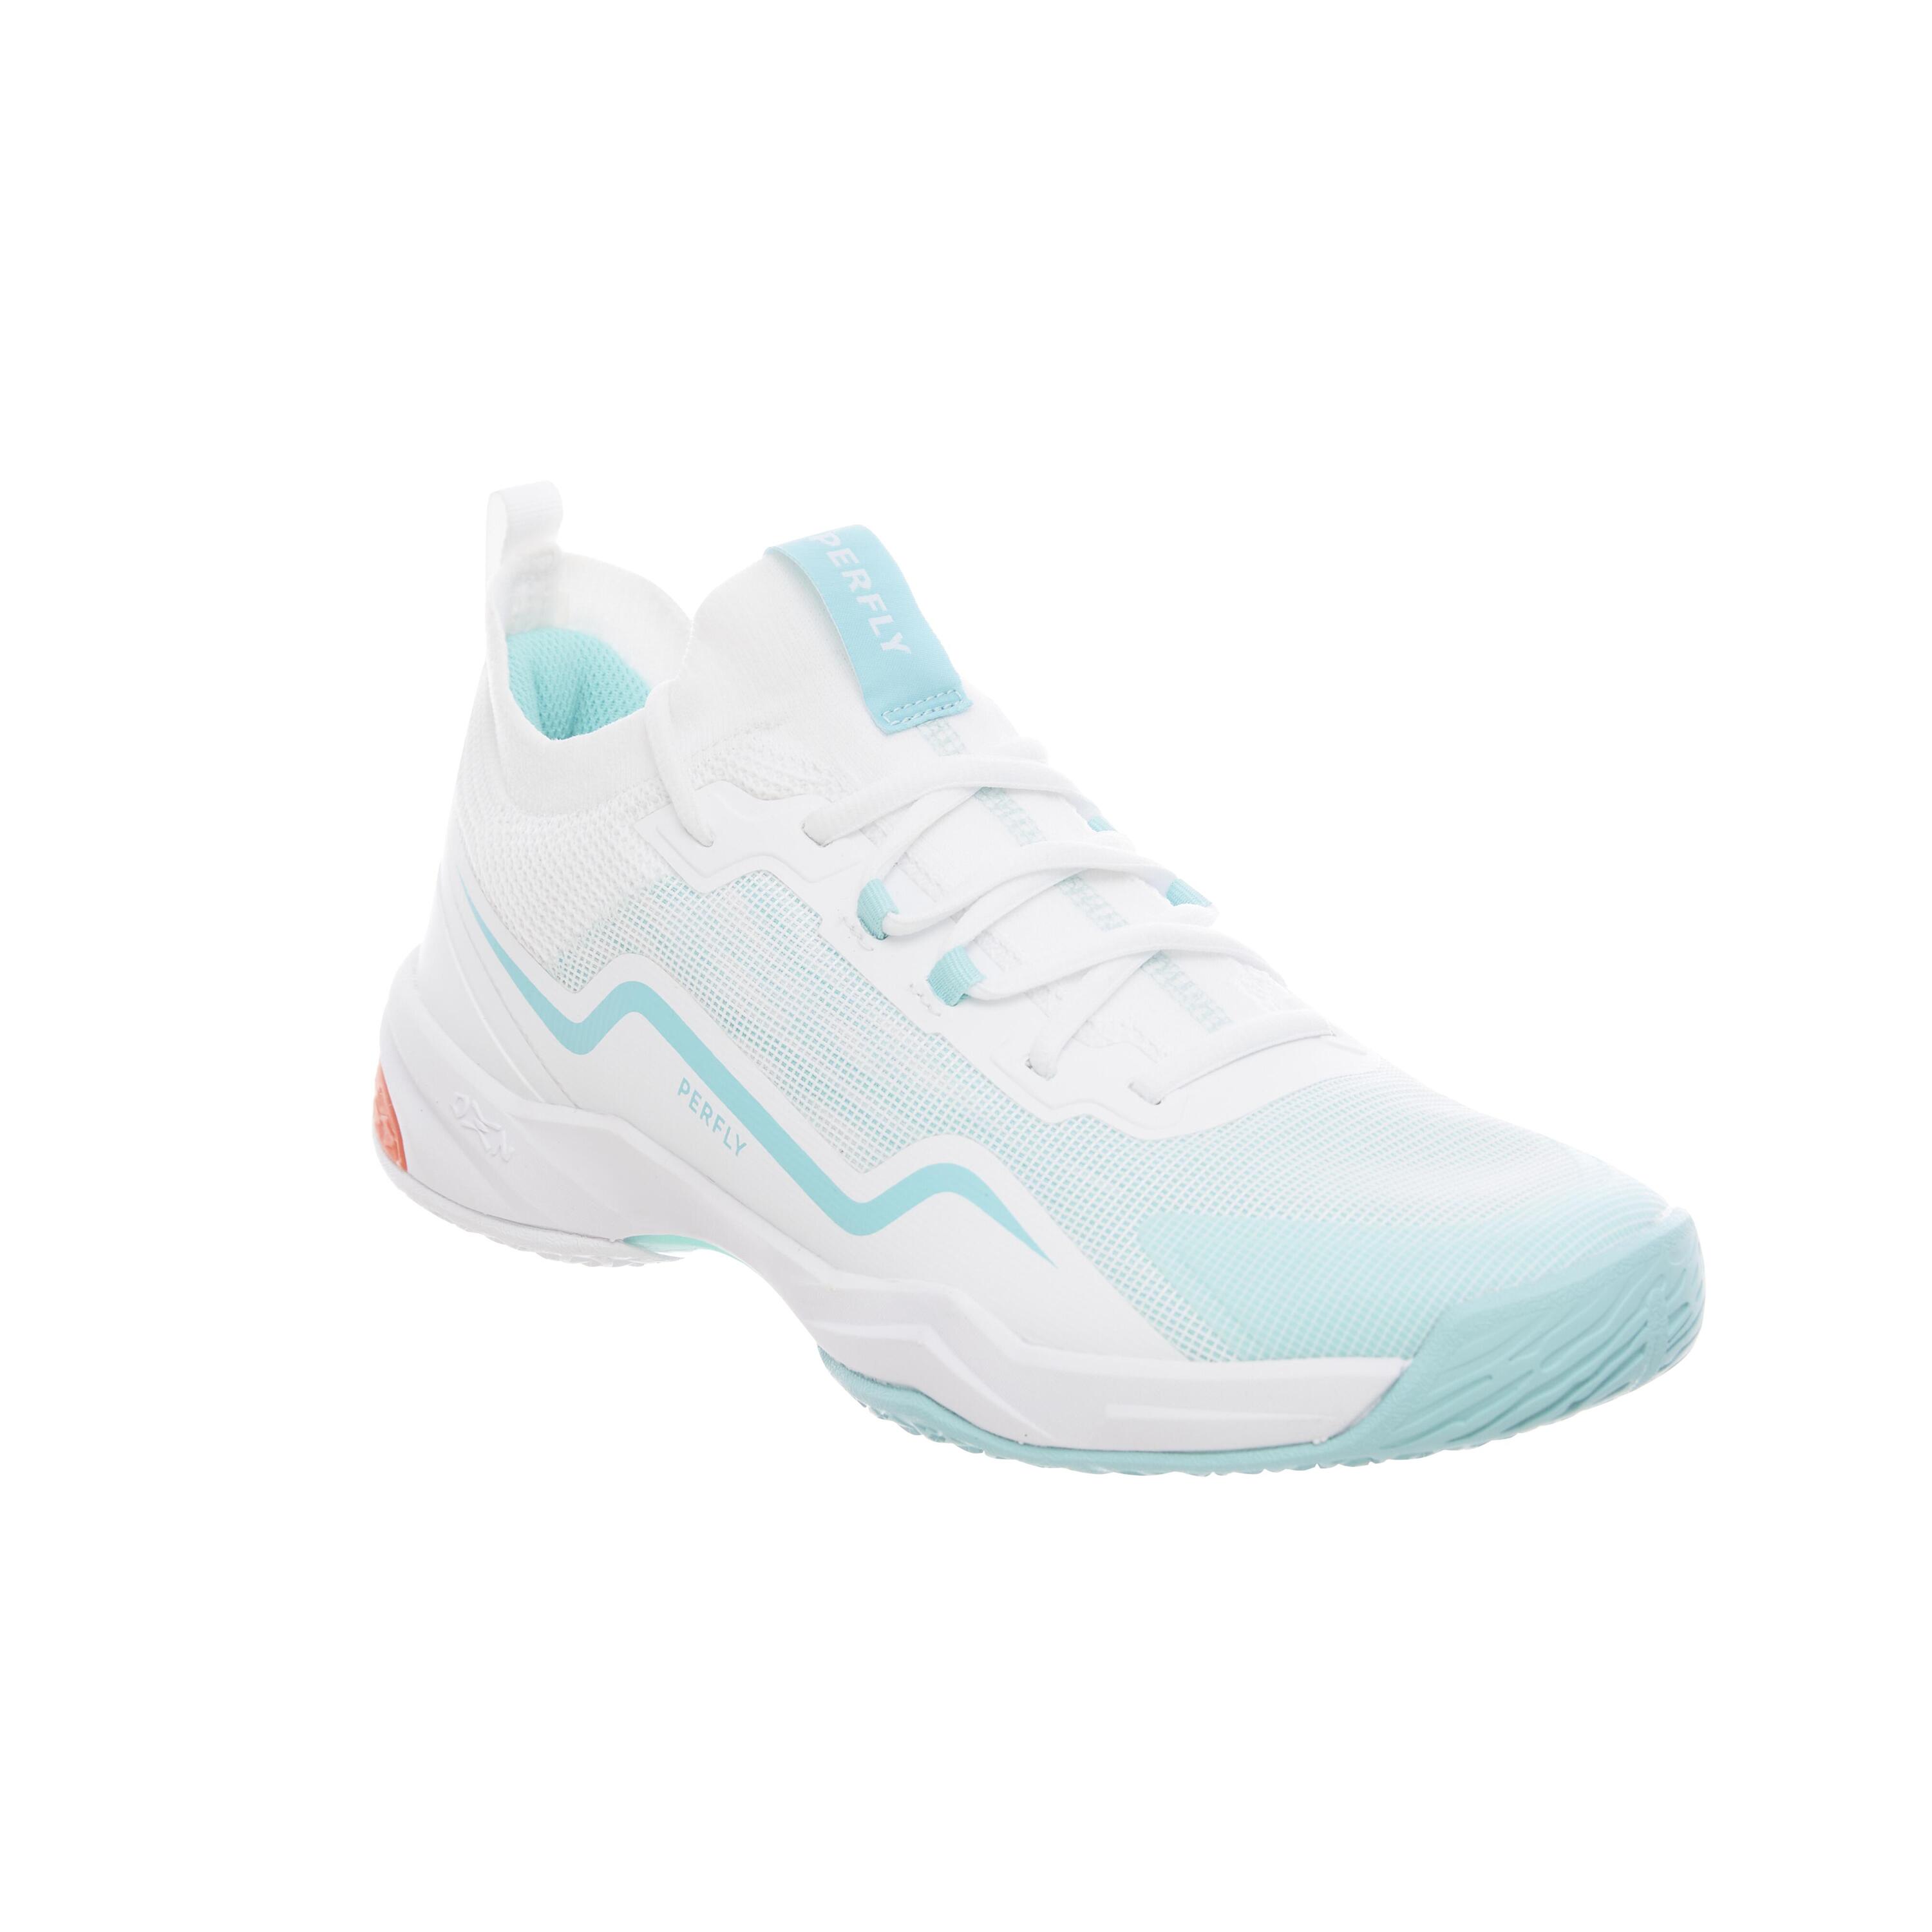 PERFLY WOMEN BADMINTON SHOES BS 900 ULTRA LITE WHITE TURQUOISE